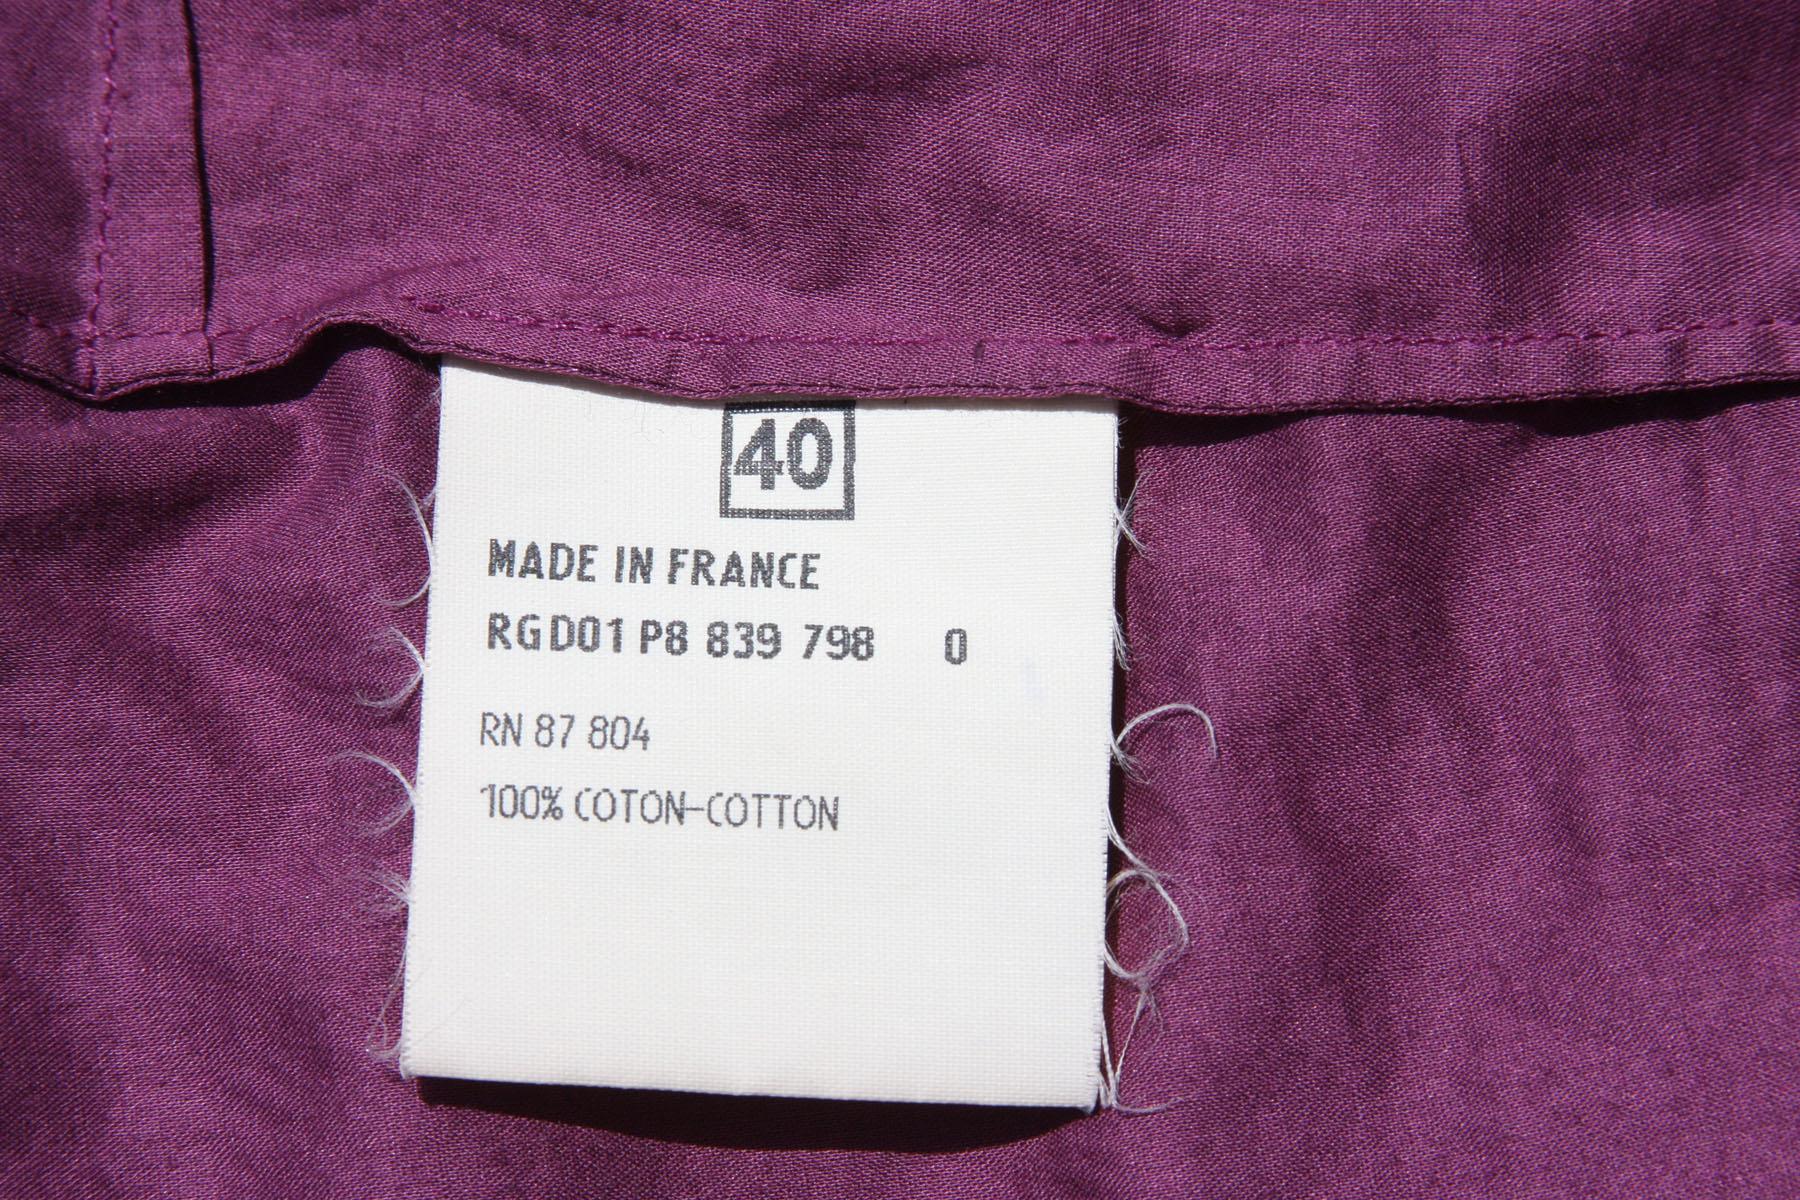 TOM FORD for YVES SAINT LAURENT F/W 2001 Plum Lace-Up Top Blouse Fr 40 - US 6/8 7